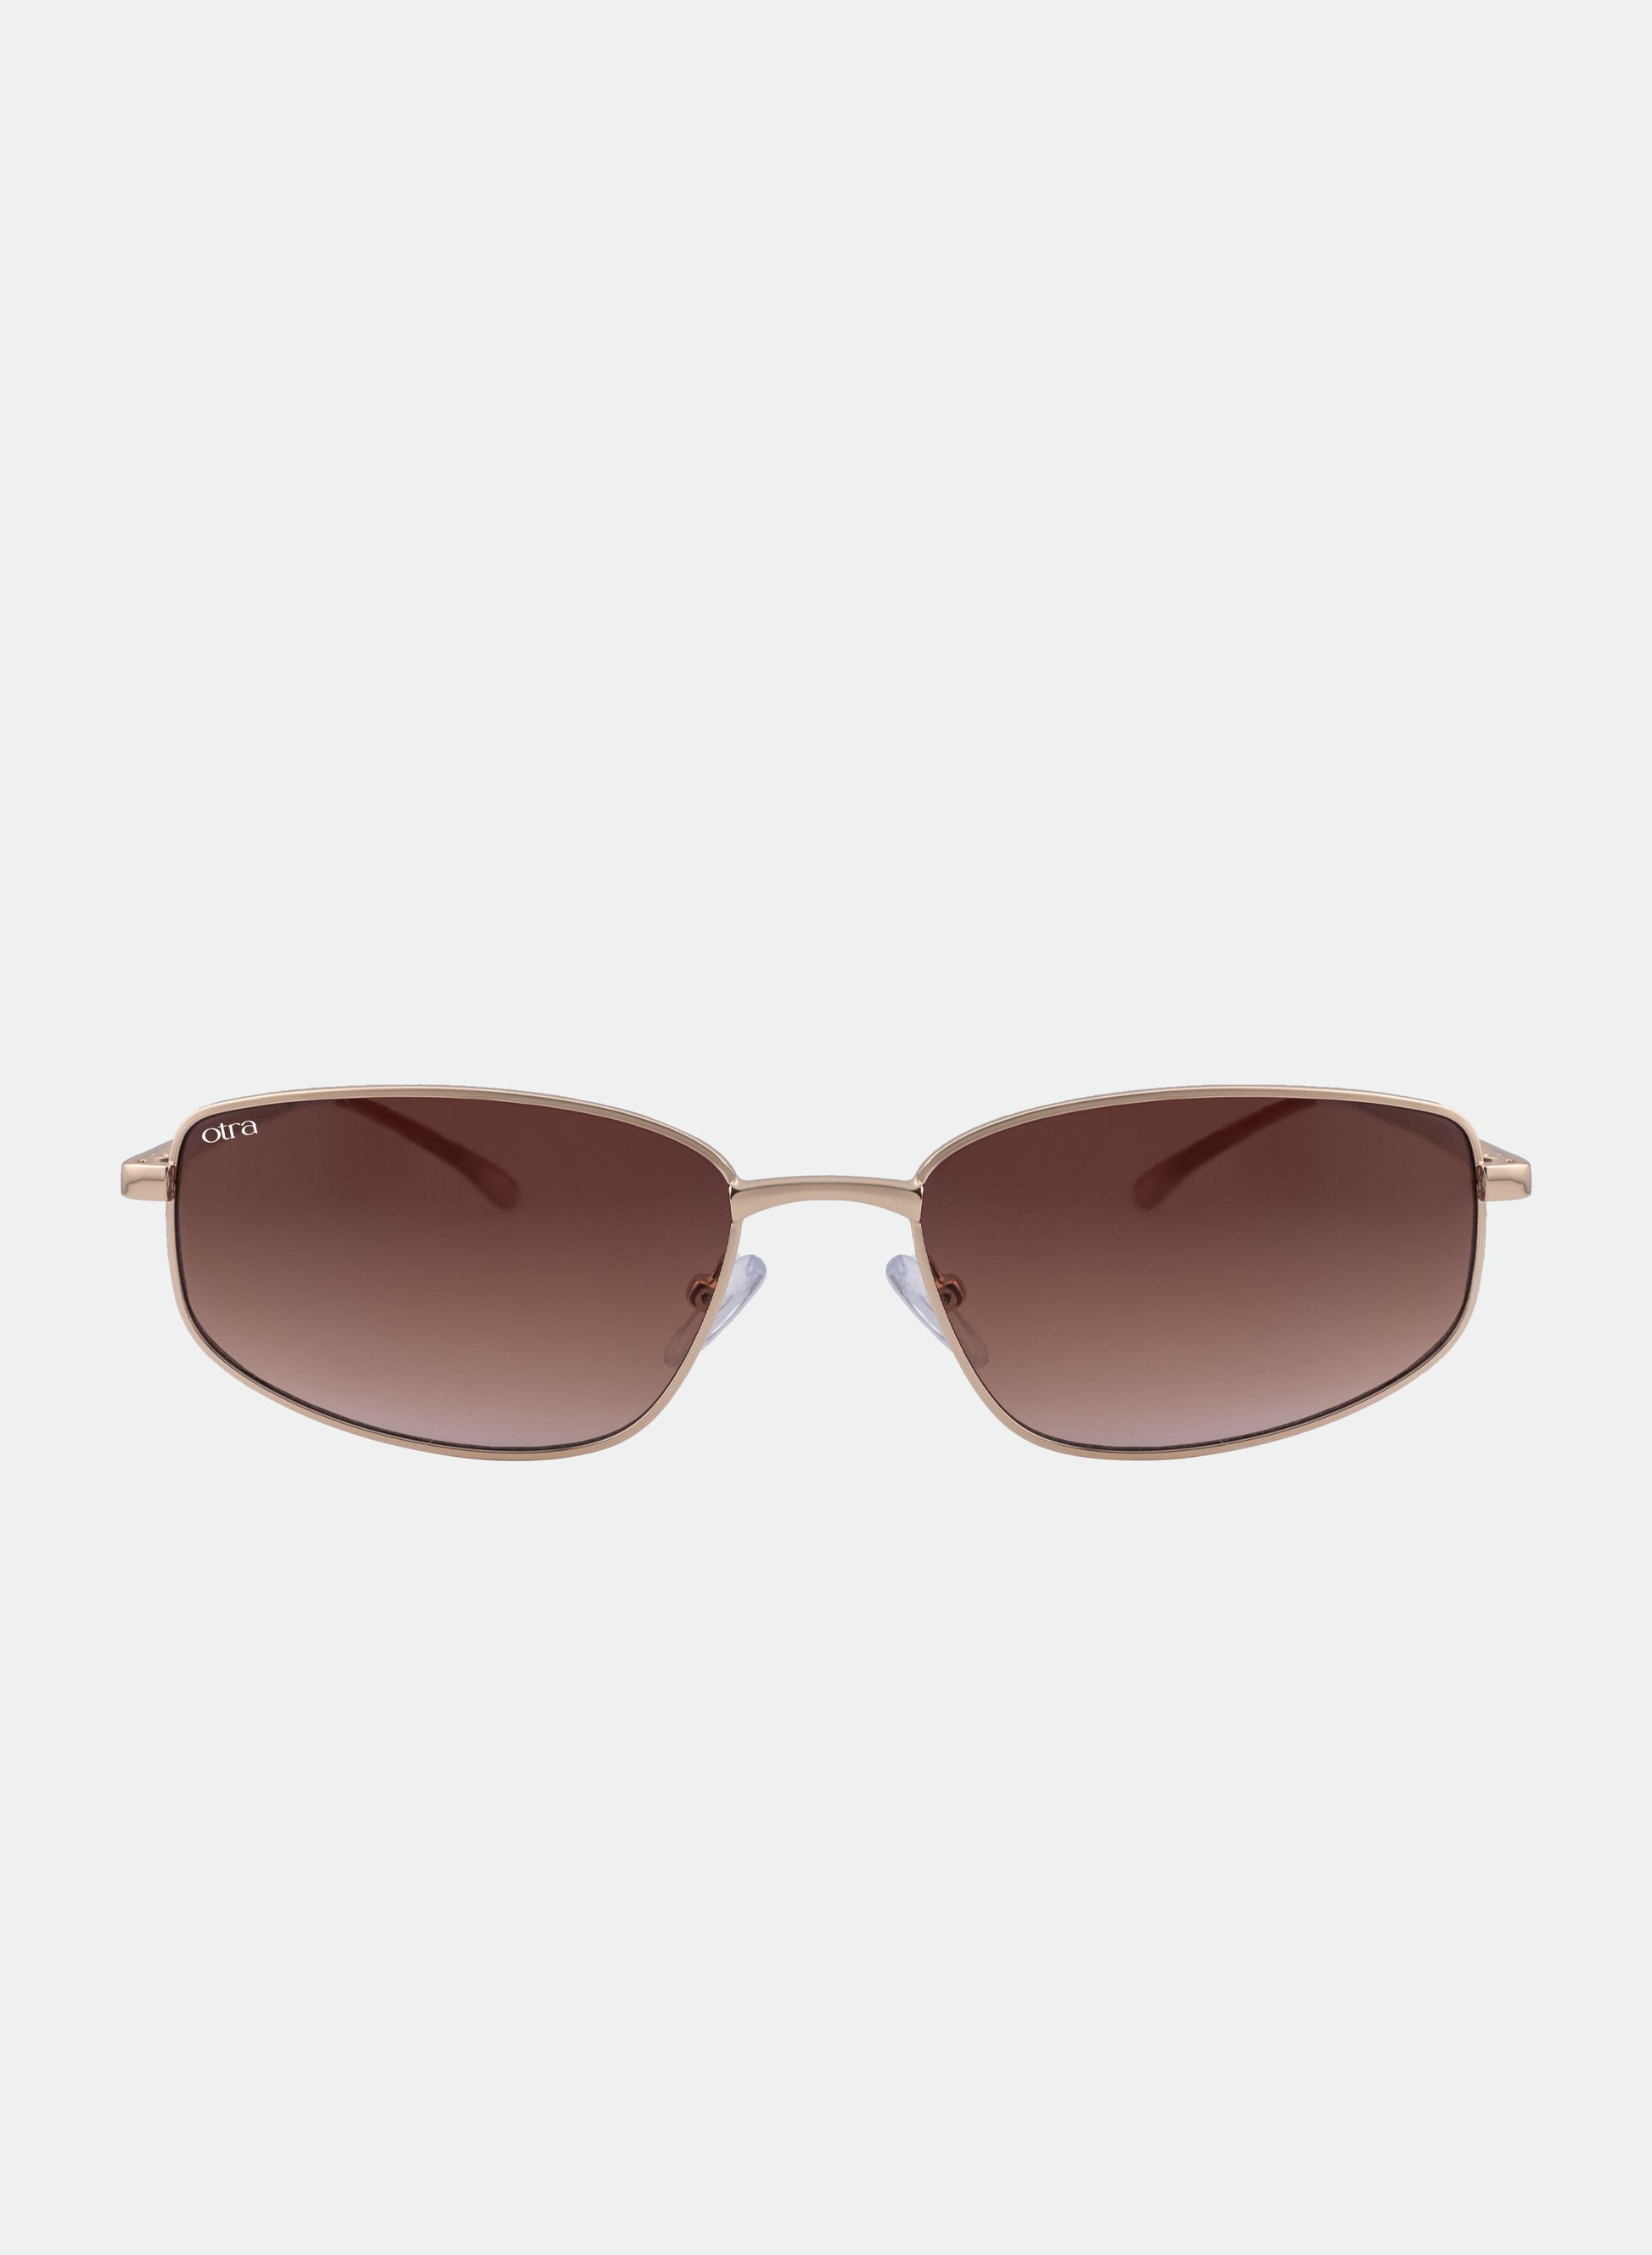 Willow sunglasses in brown